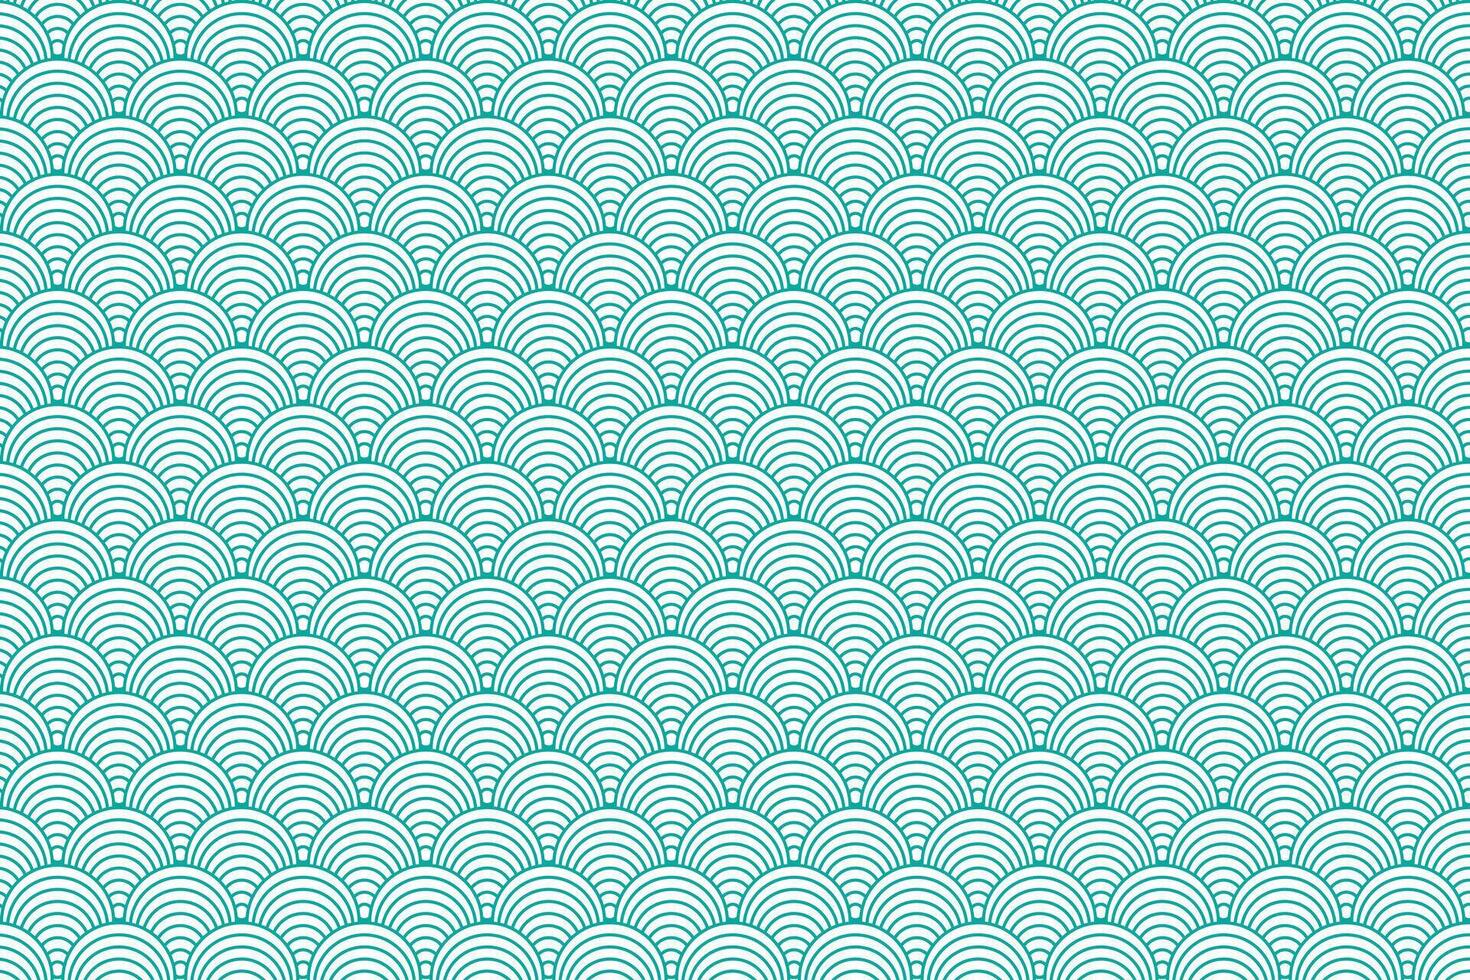 Illustration, japan wave pattern layer of green line circle on empty background. vector